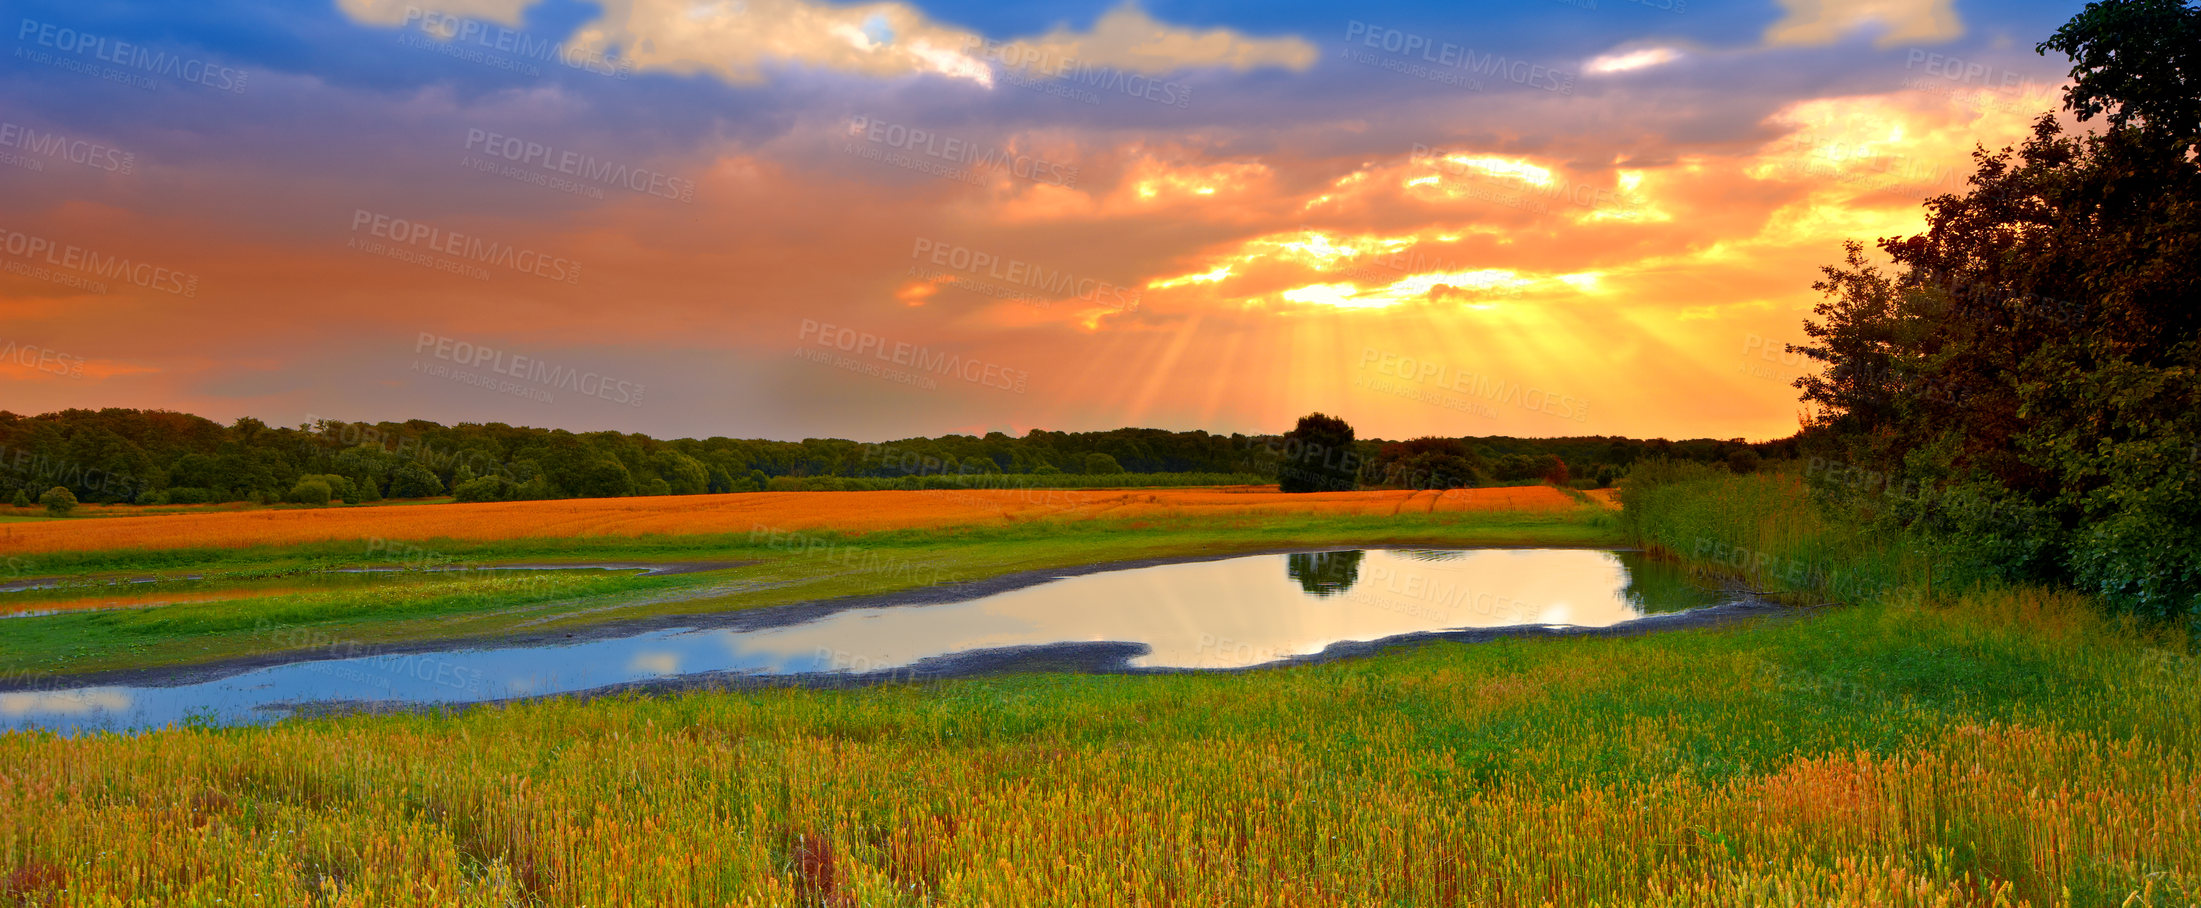 Buy stock photo A photo of sunset in the countryside, Denmark